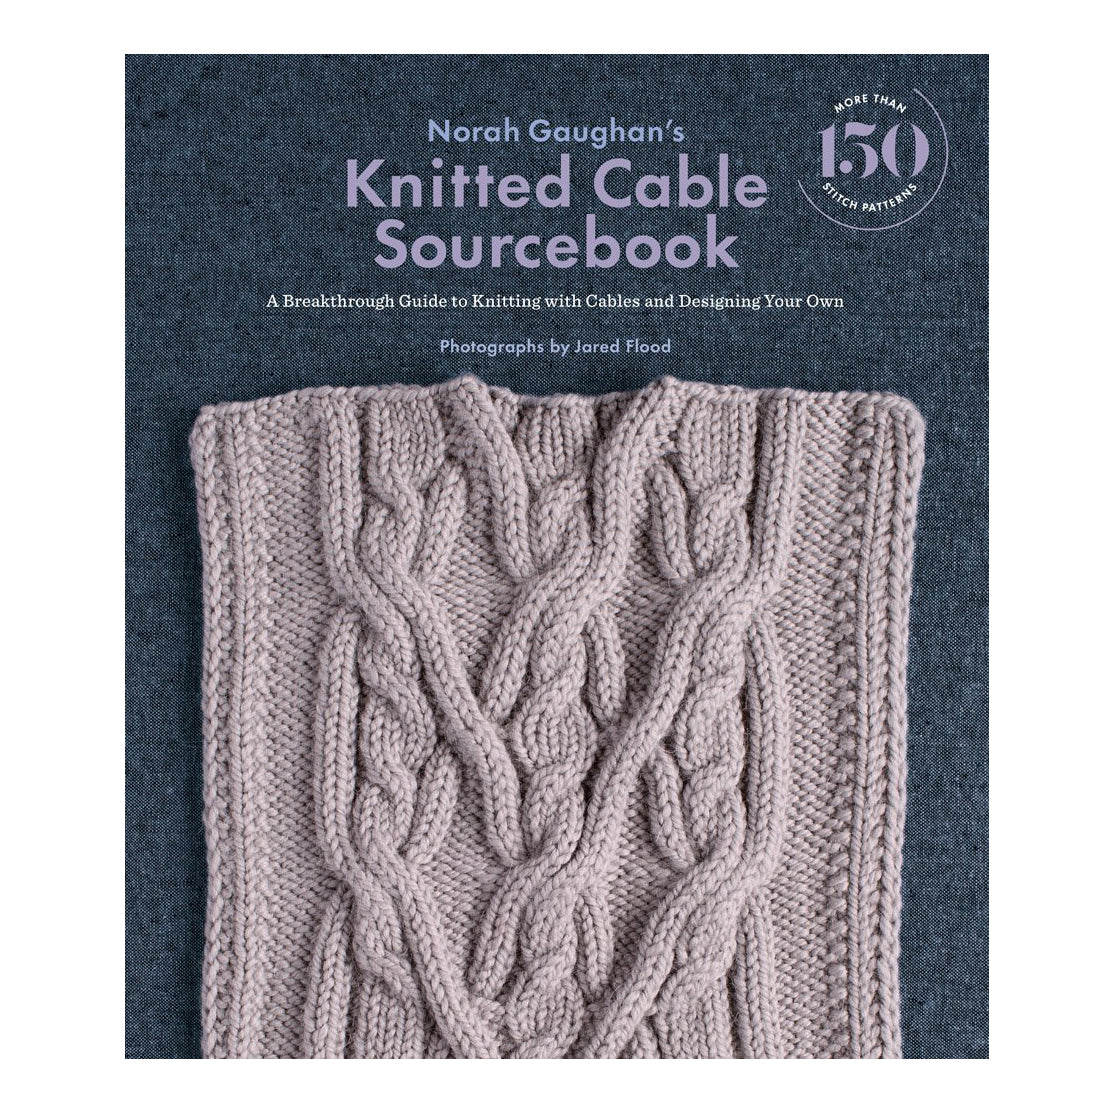 Knitted Cable Source Book (Norah Gaughan)